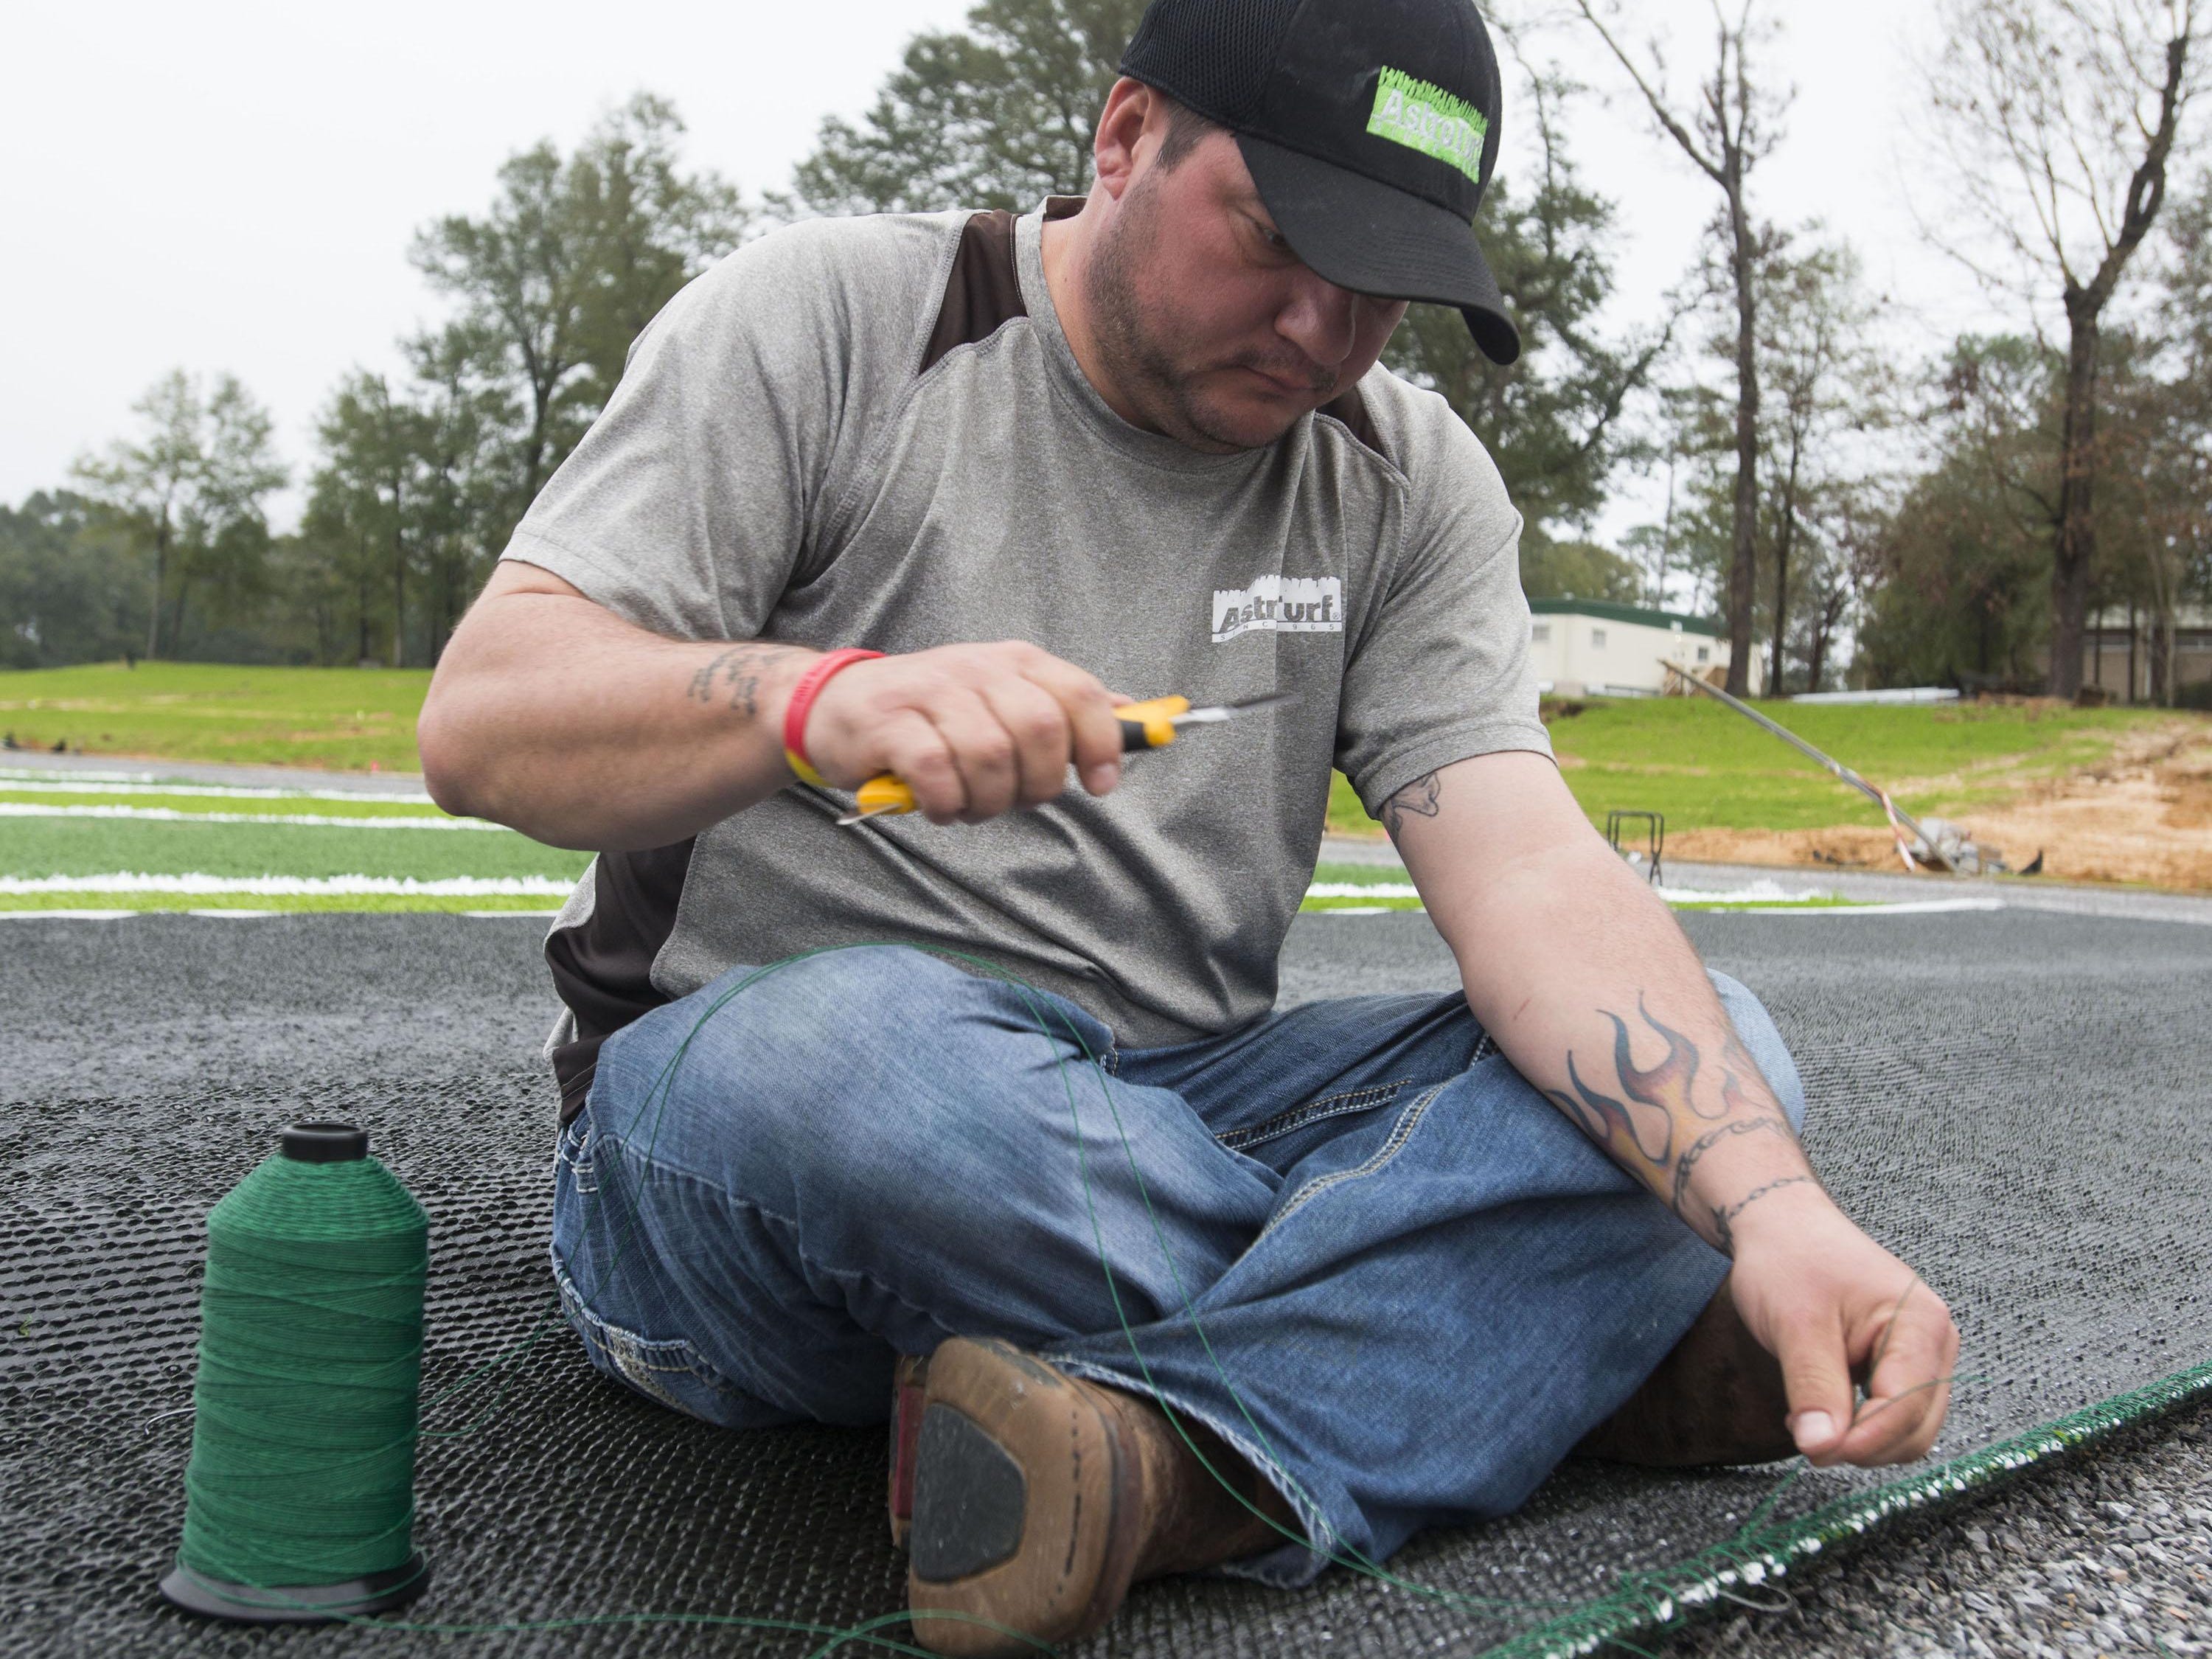 Brandon Curtis hand-stitchs a section of AstroTurf together during the installation of the new playing surface at University of West Football facility Friday morning Jan. 8, 2016.